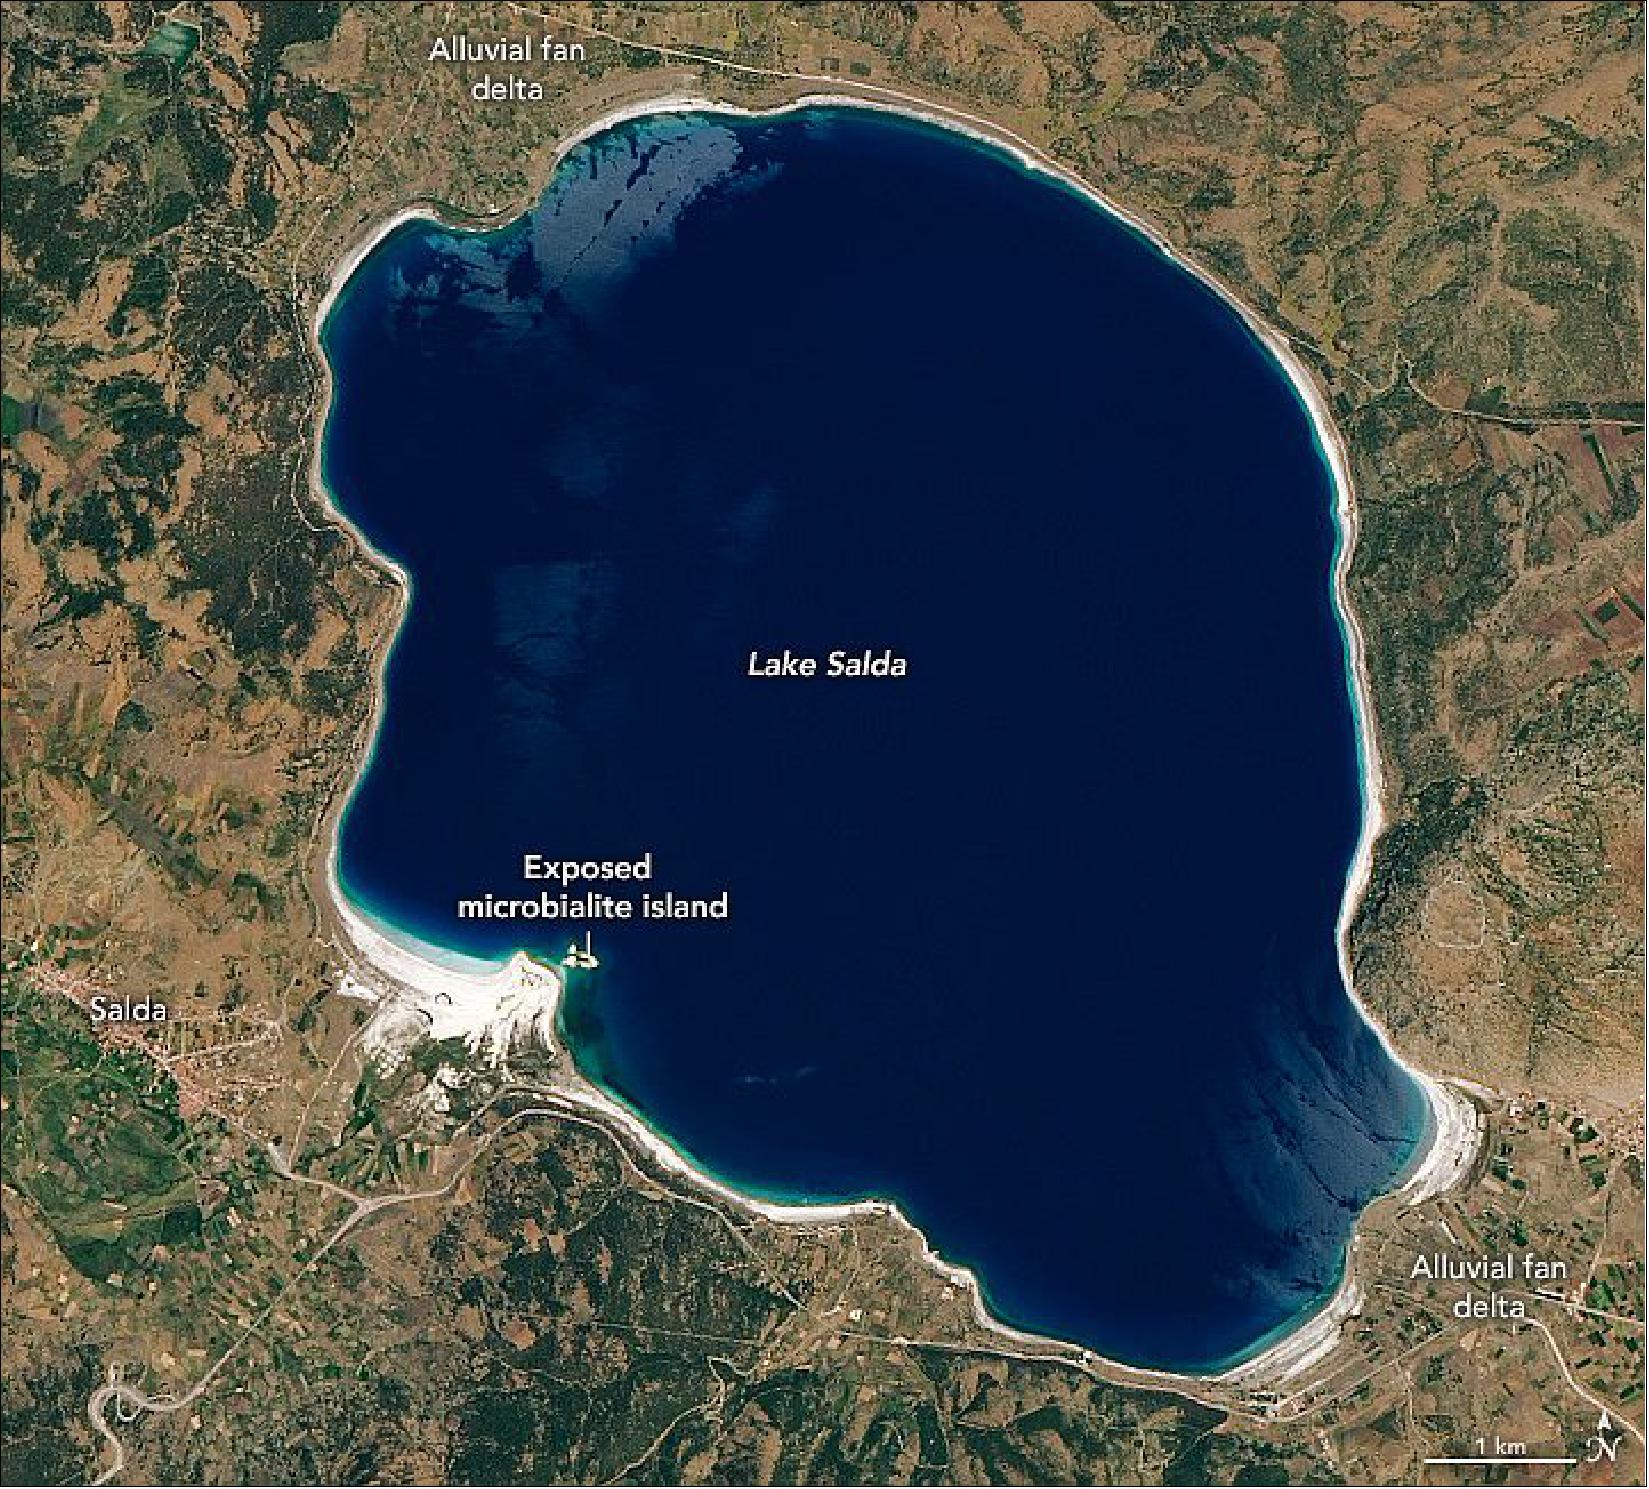 Figure 60: Though located a world away, Lake Salda, Turkey, shares similar mineralogy as Jezero Crater on Mars. The image shows Lake Salda on June 8, 2020, as observed by the Operational Land Imager (OLI) on Landsat-8. The lake contains alluvial fans full of rock deposits eroded and washed down from the surrounding bedrock (similar to the delta in Jezero). By studying how material is deposited in Lake Salda, the team can learn more about the various depositional processes at Lake Jezero (image credit: NASA Earth Observatory, image by Lauren Dauphin, using Landsat data from the U.S. Geological Survey. Story by Kasha Patel)